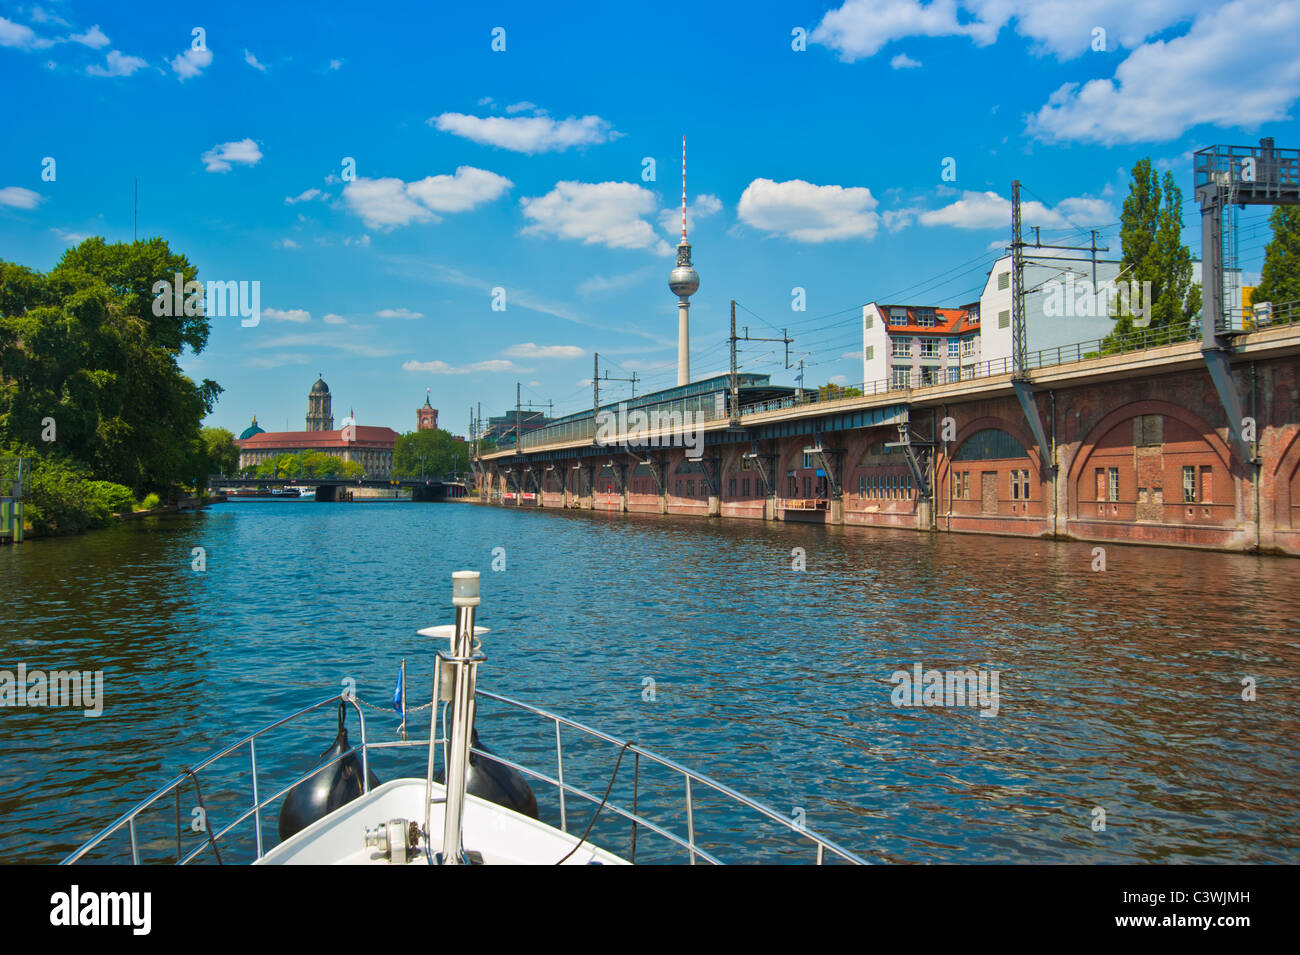 Bow of yacht on Spree river in Berlin at Jannowitzbruecke with alex tv tower in background Stock Photo